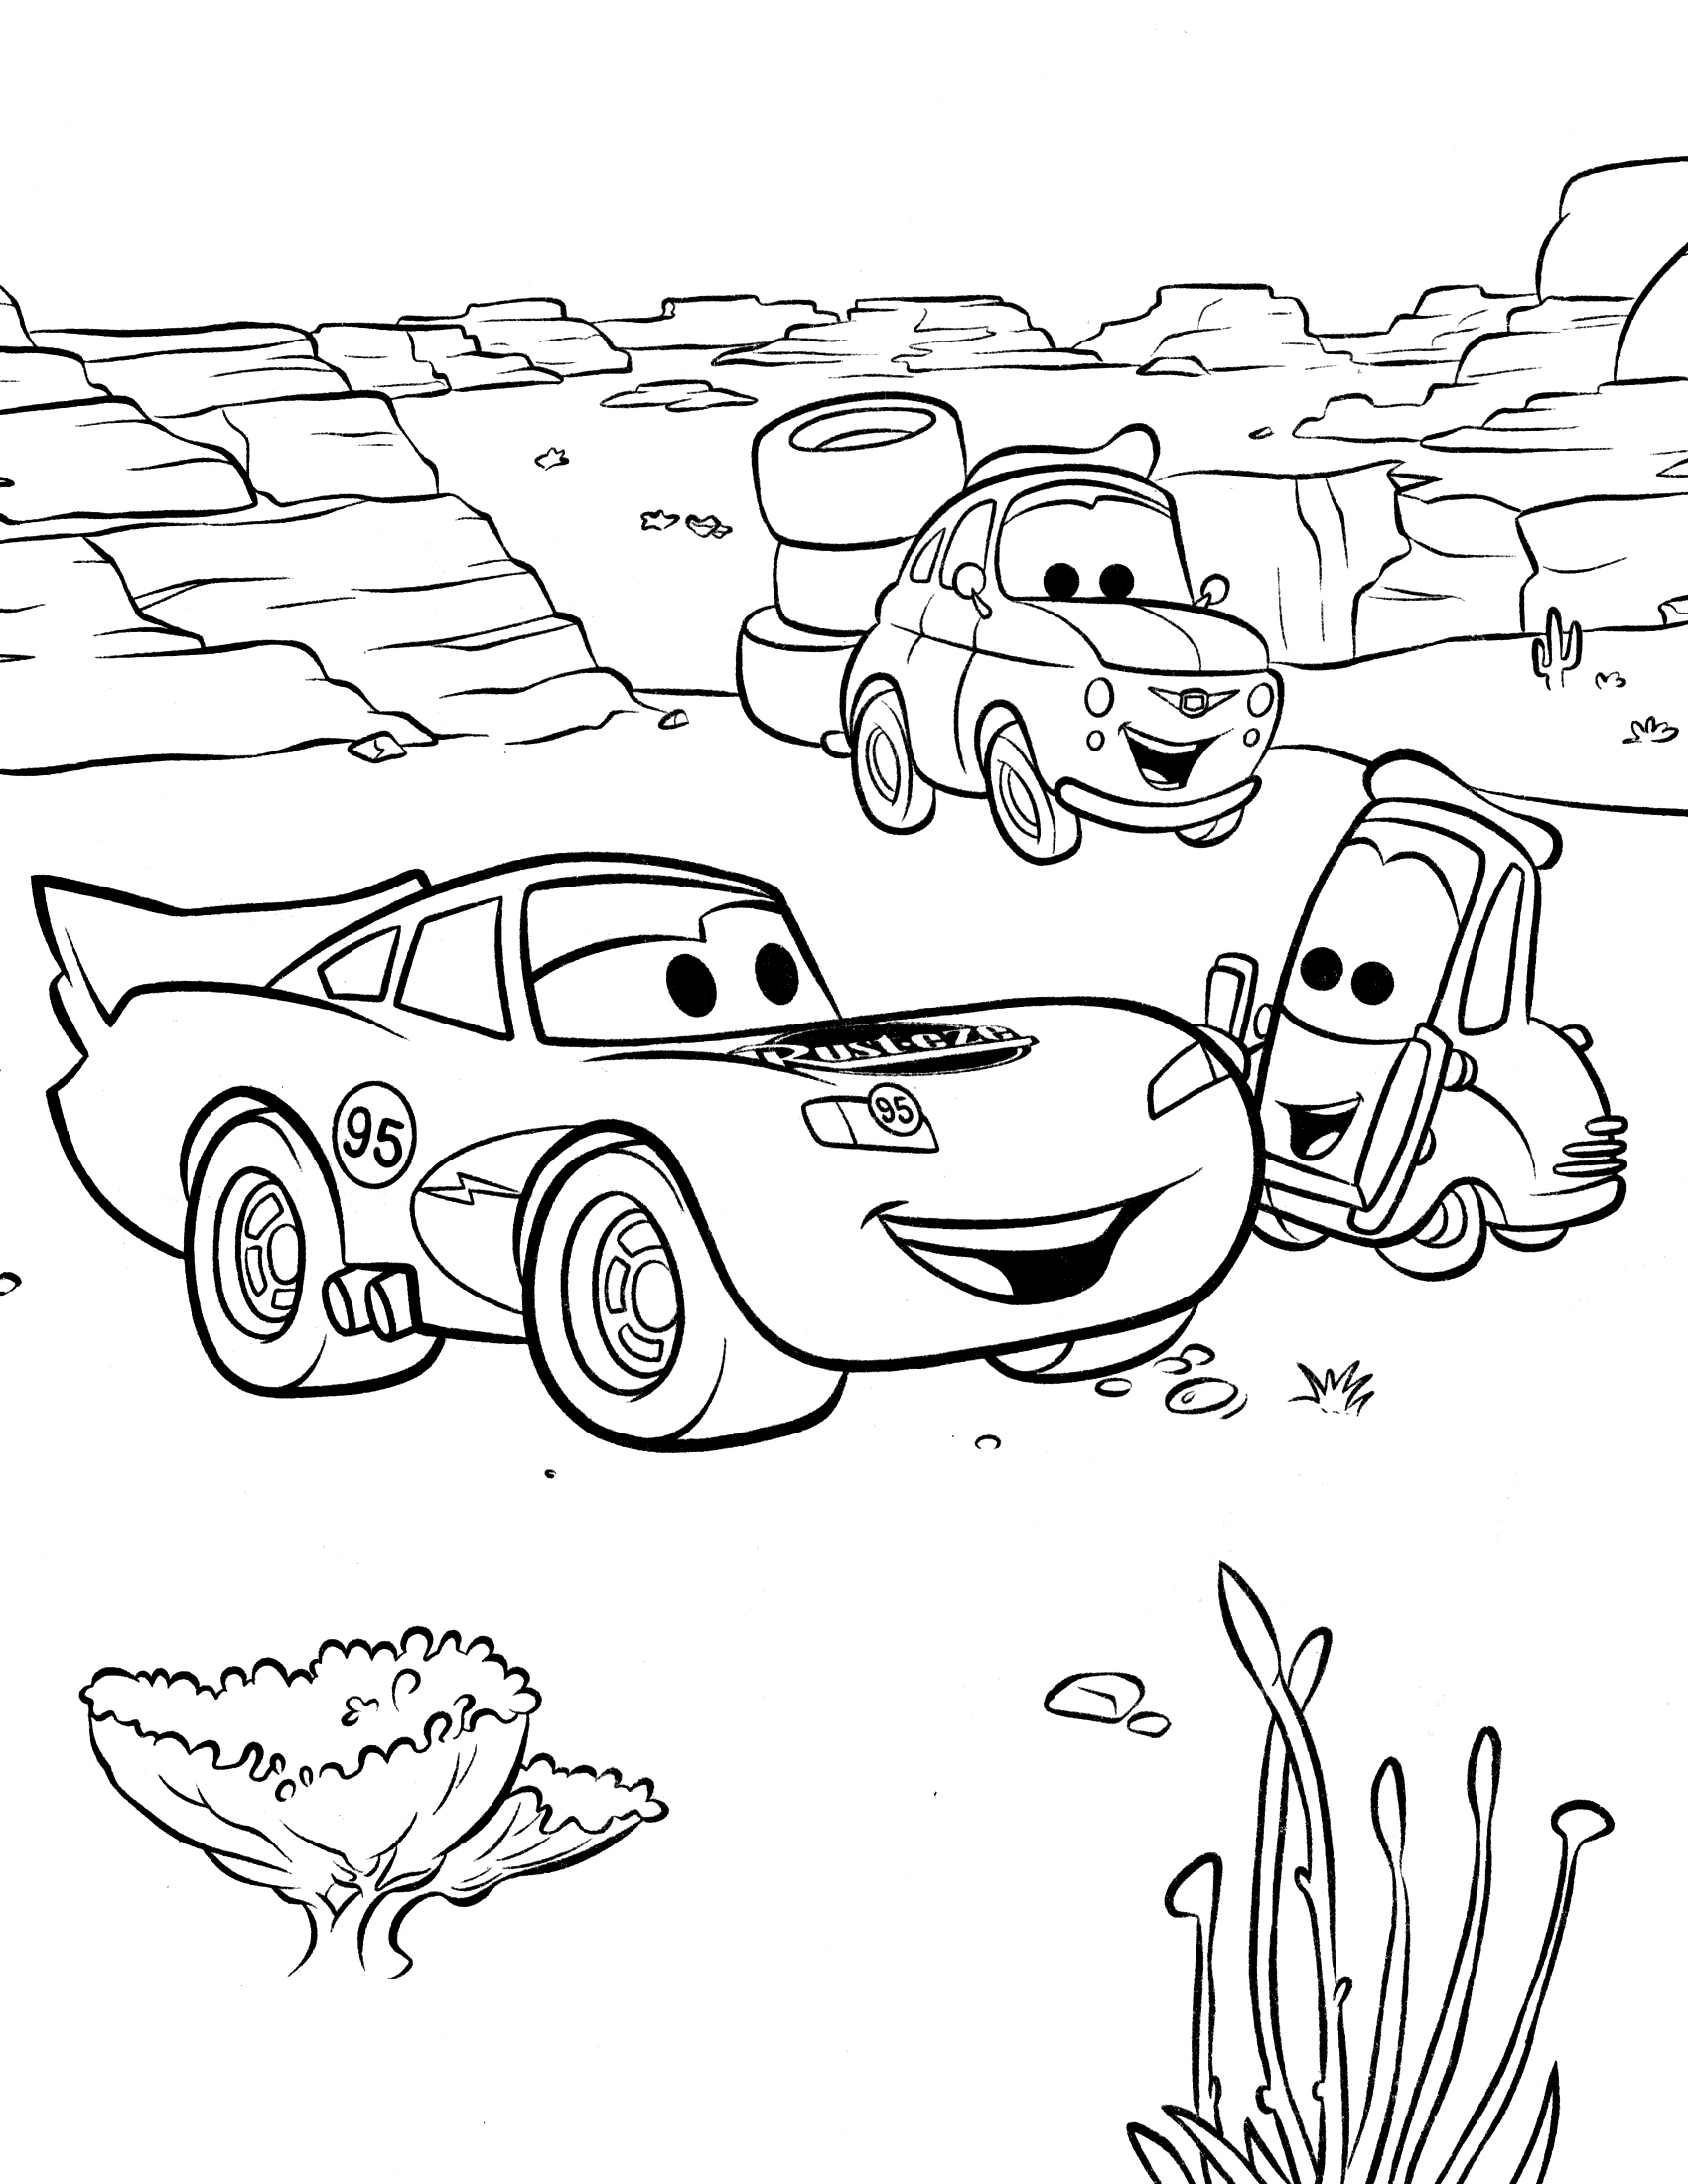 Cars 3 Coloring Pages At GetDrawings | Free Download - Coloring Home